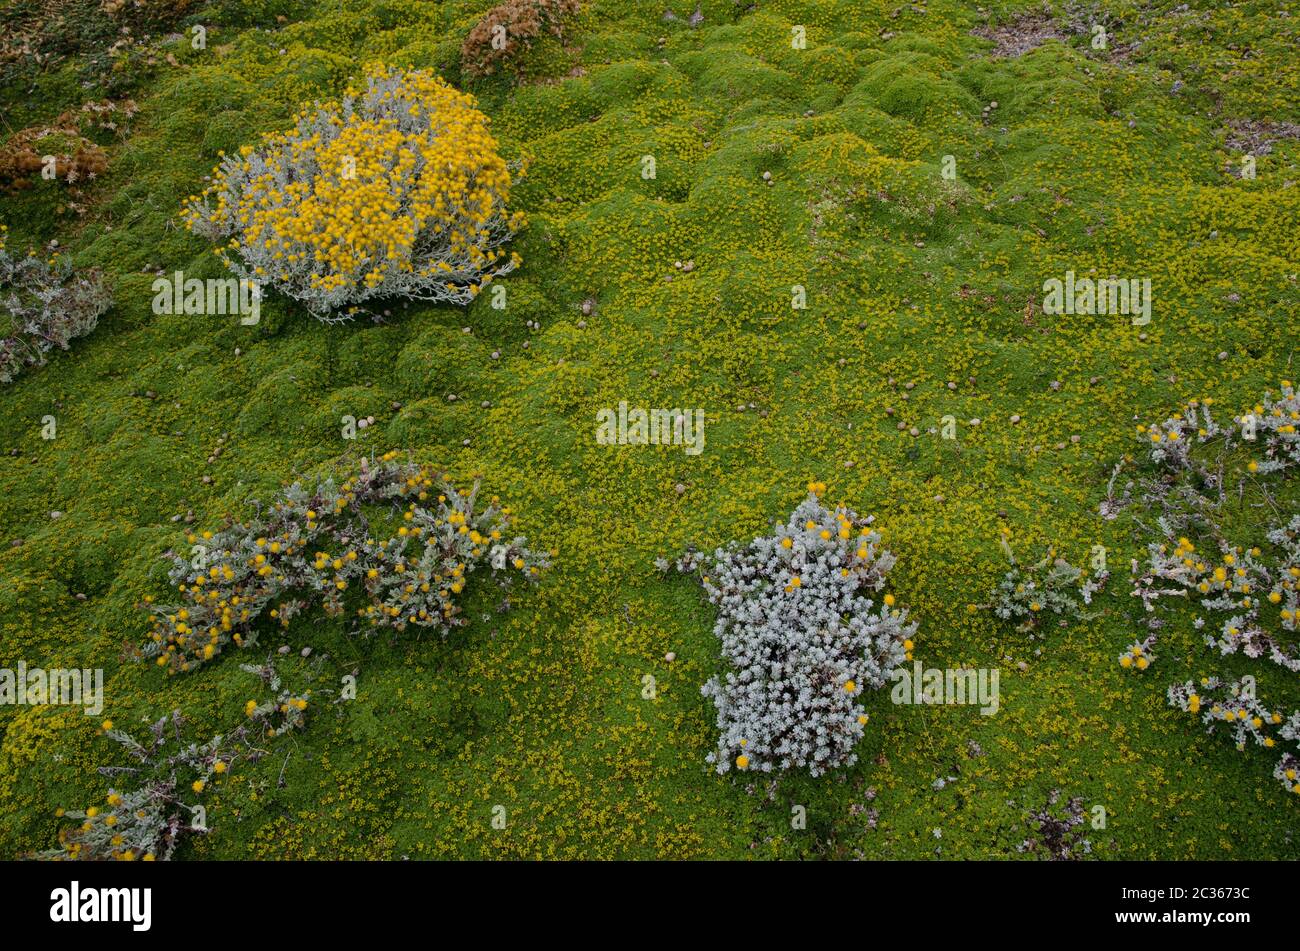 Plants of Senecio sp. and ground covered by vegetation. Otway Sound and Penguin Reserve. Magallanes Province. Magallanes and Chilean Antarctic Region. Stock Photo